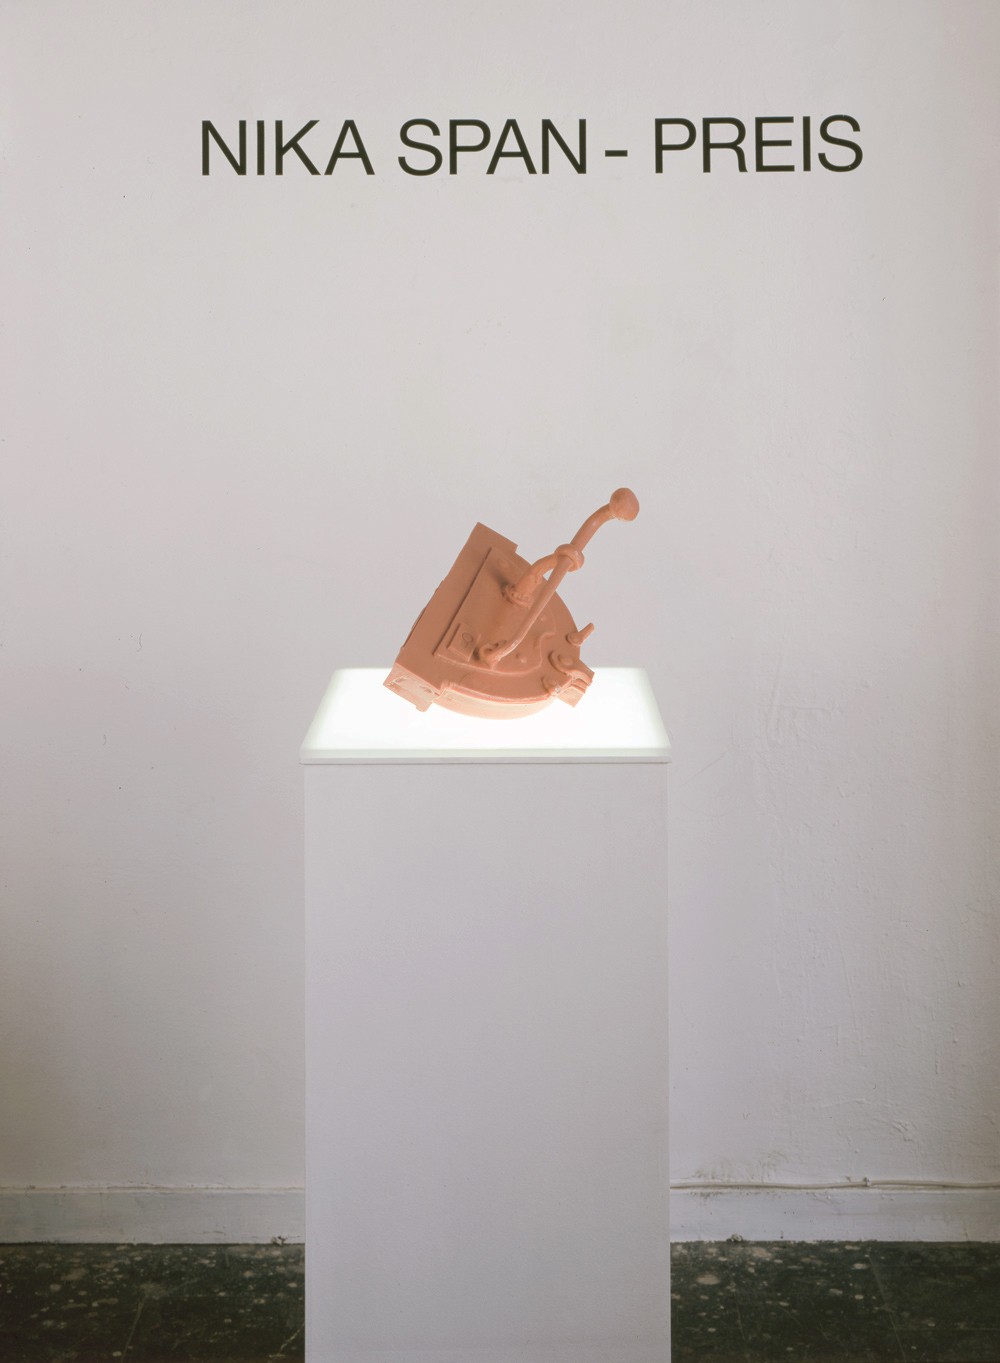 Art, artwork. An art prize entitled "Nika Span - Prize" by Nika Span / Nika Špan. Material: synthetic resin. Size: Approx 40 x 35 x 30 cm. Exhibition: Annual Exhibition 1997, Kunstakademie Duesseldorf, Germany.